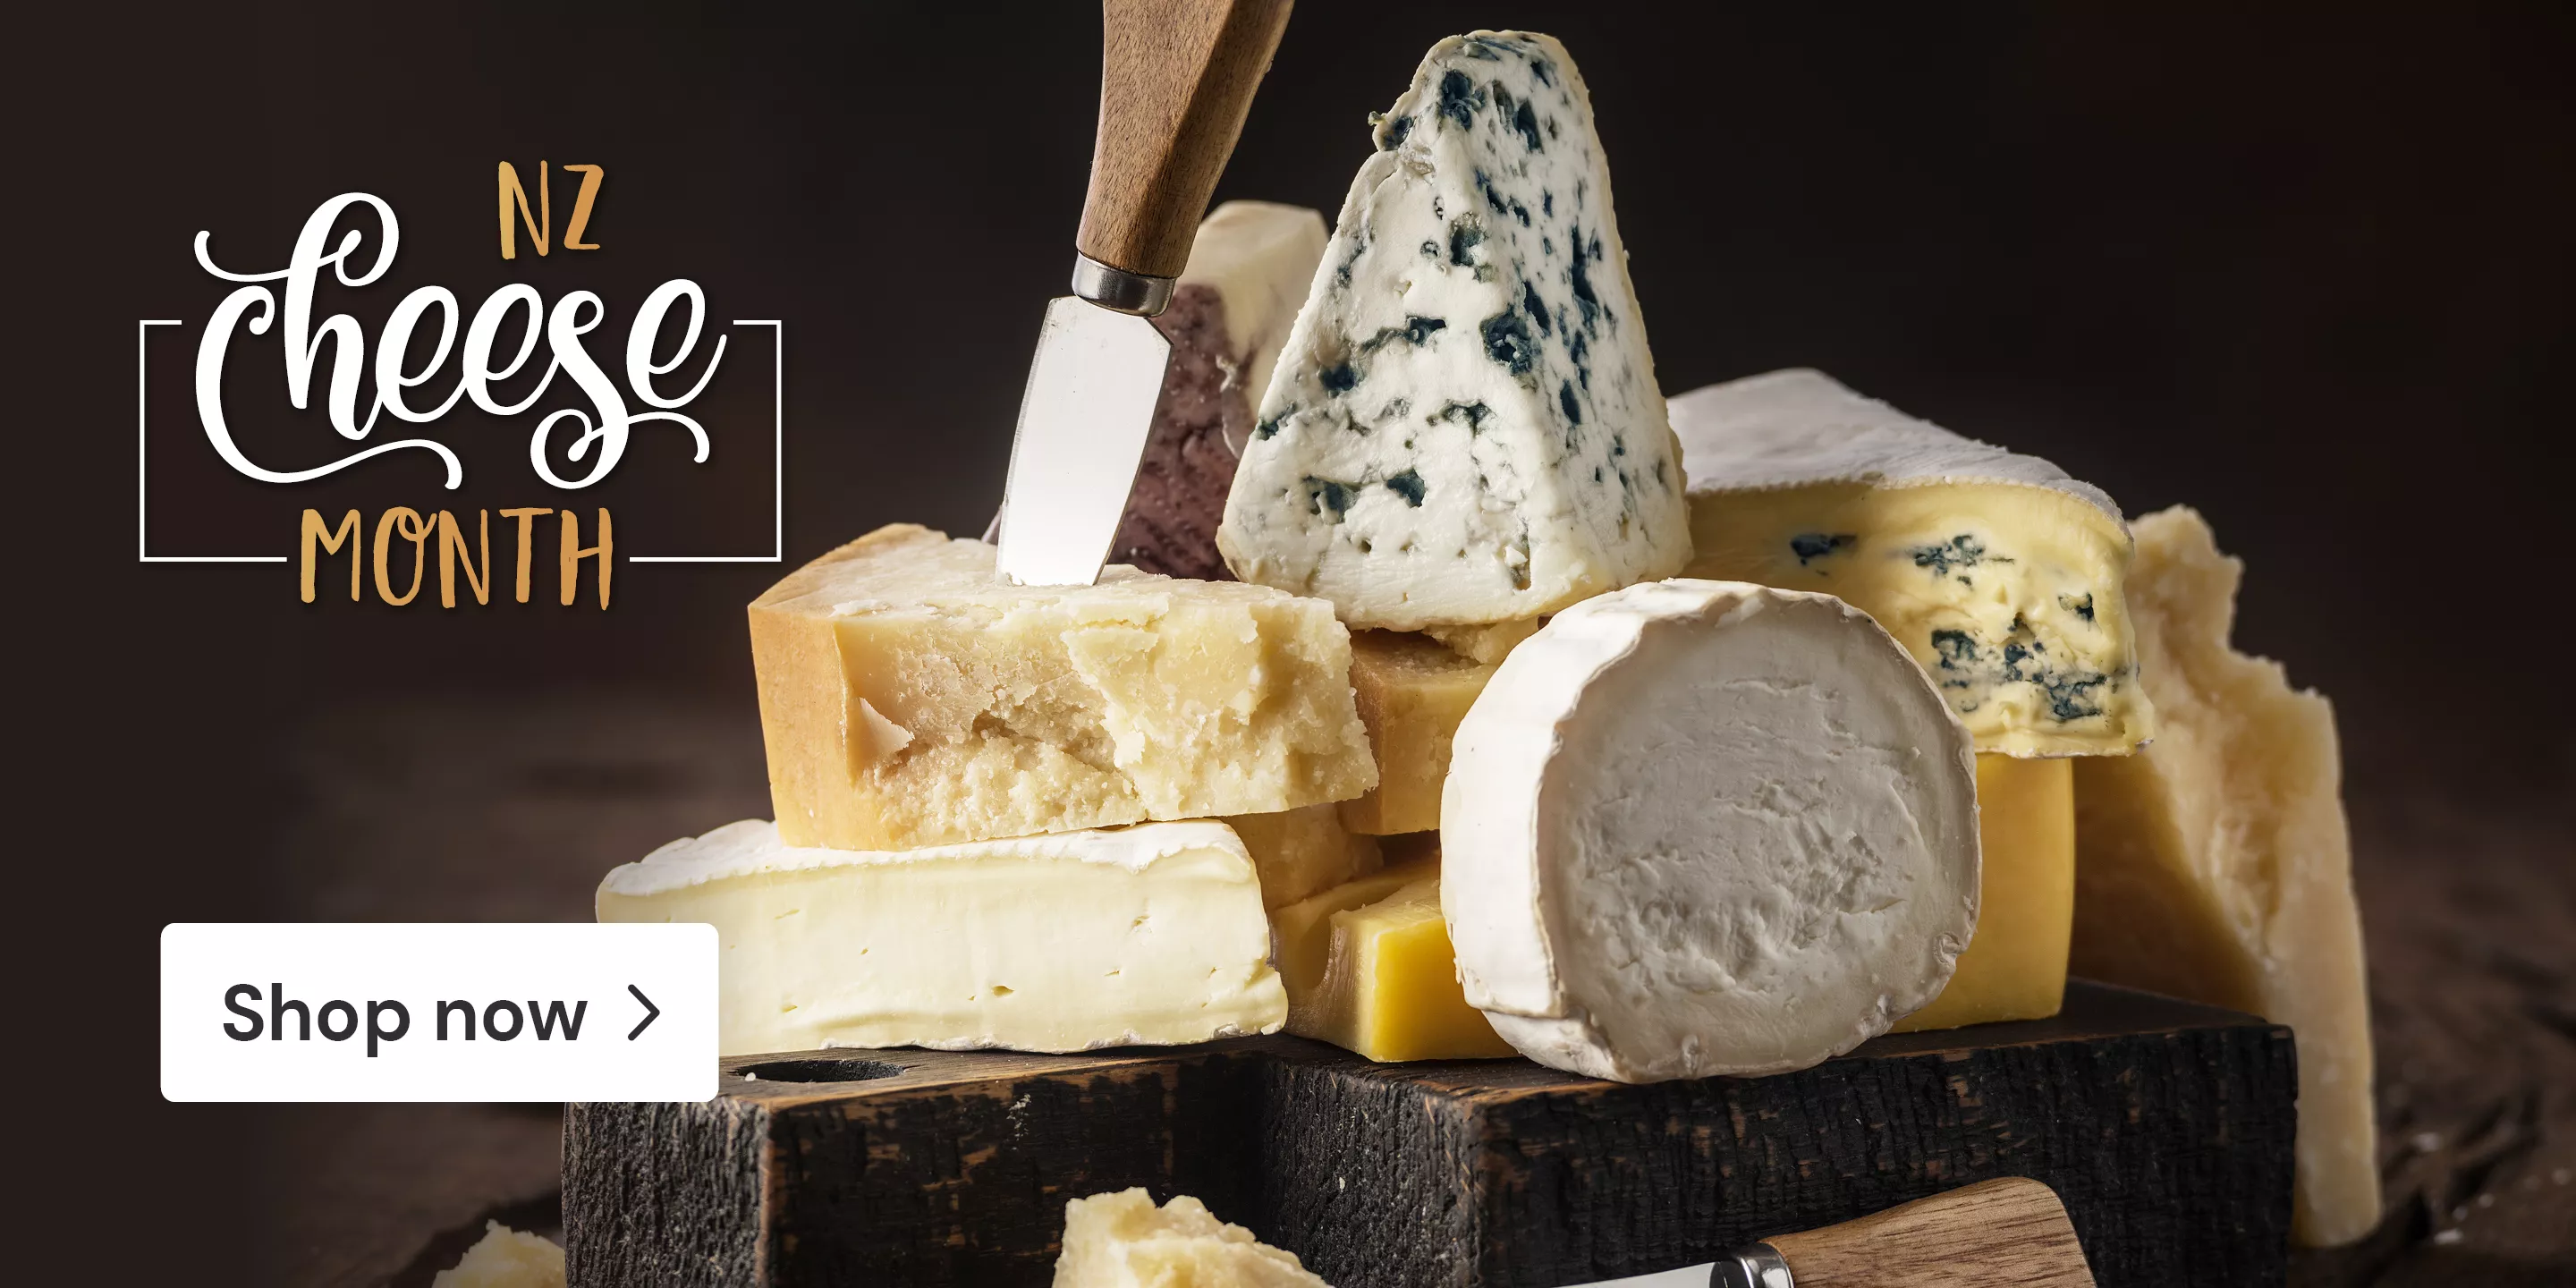 NZ Cheese month shop now